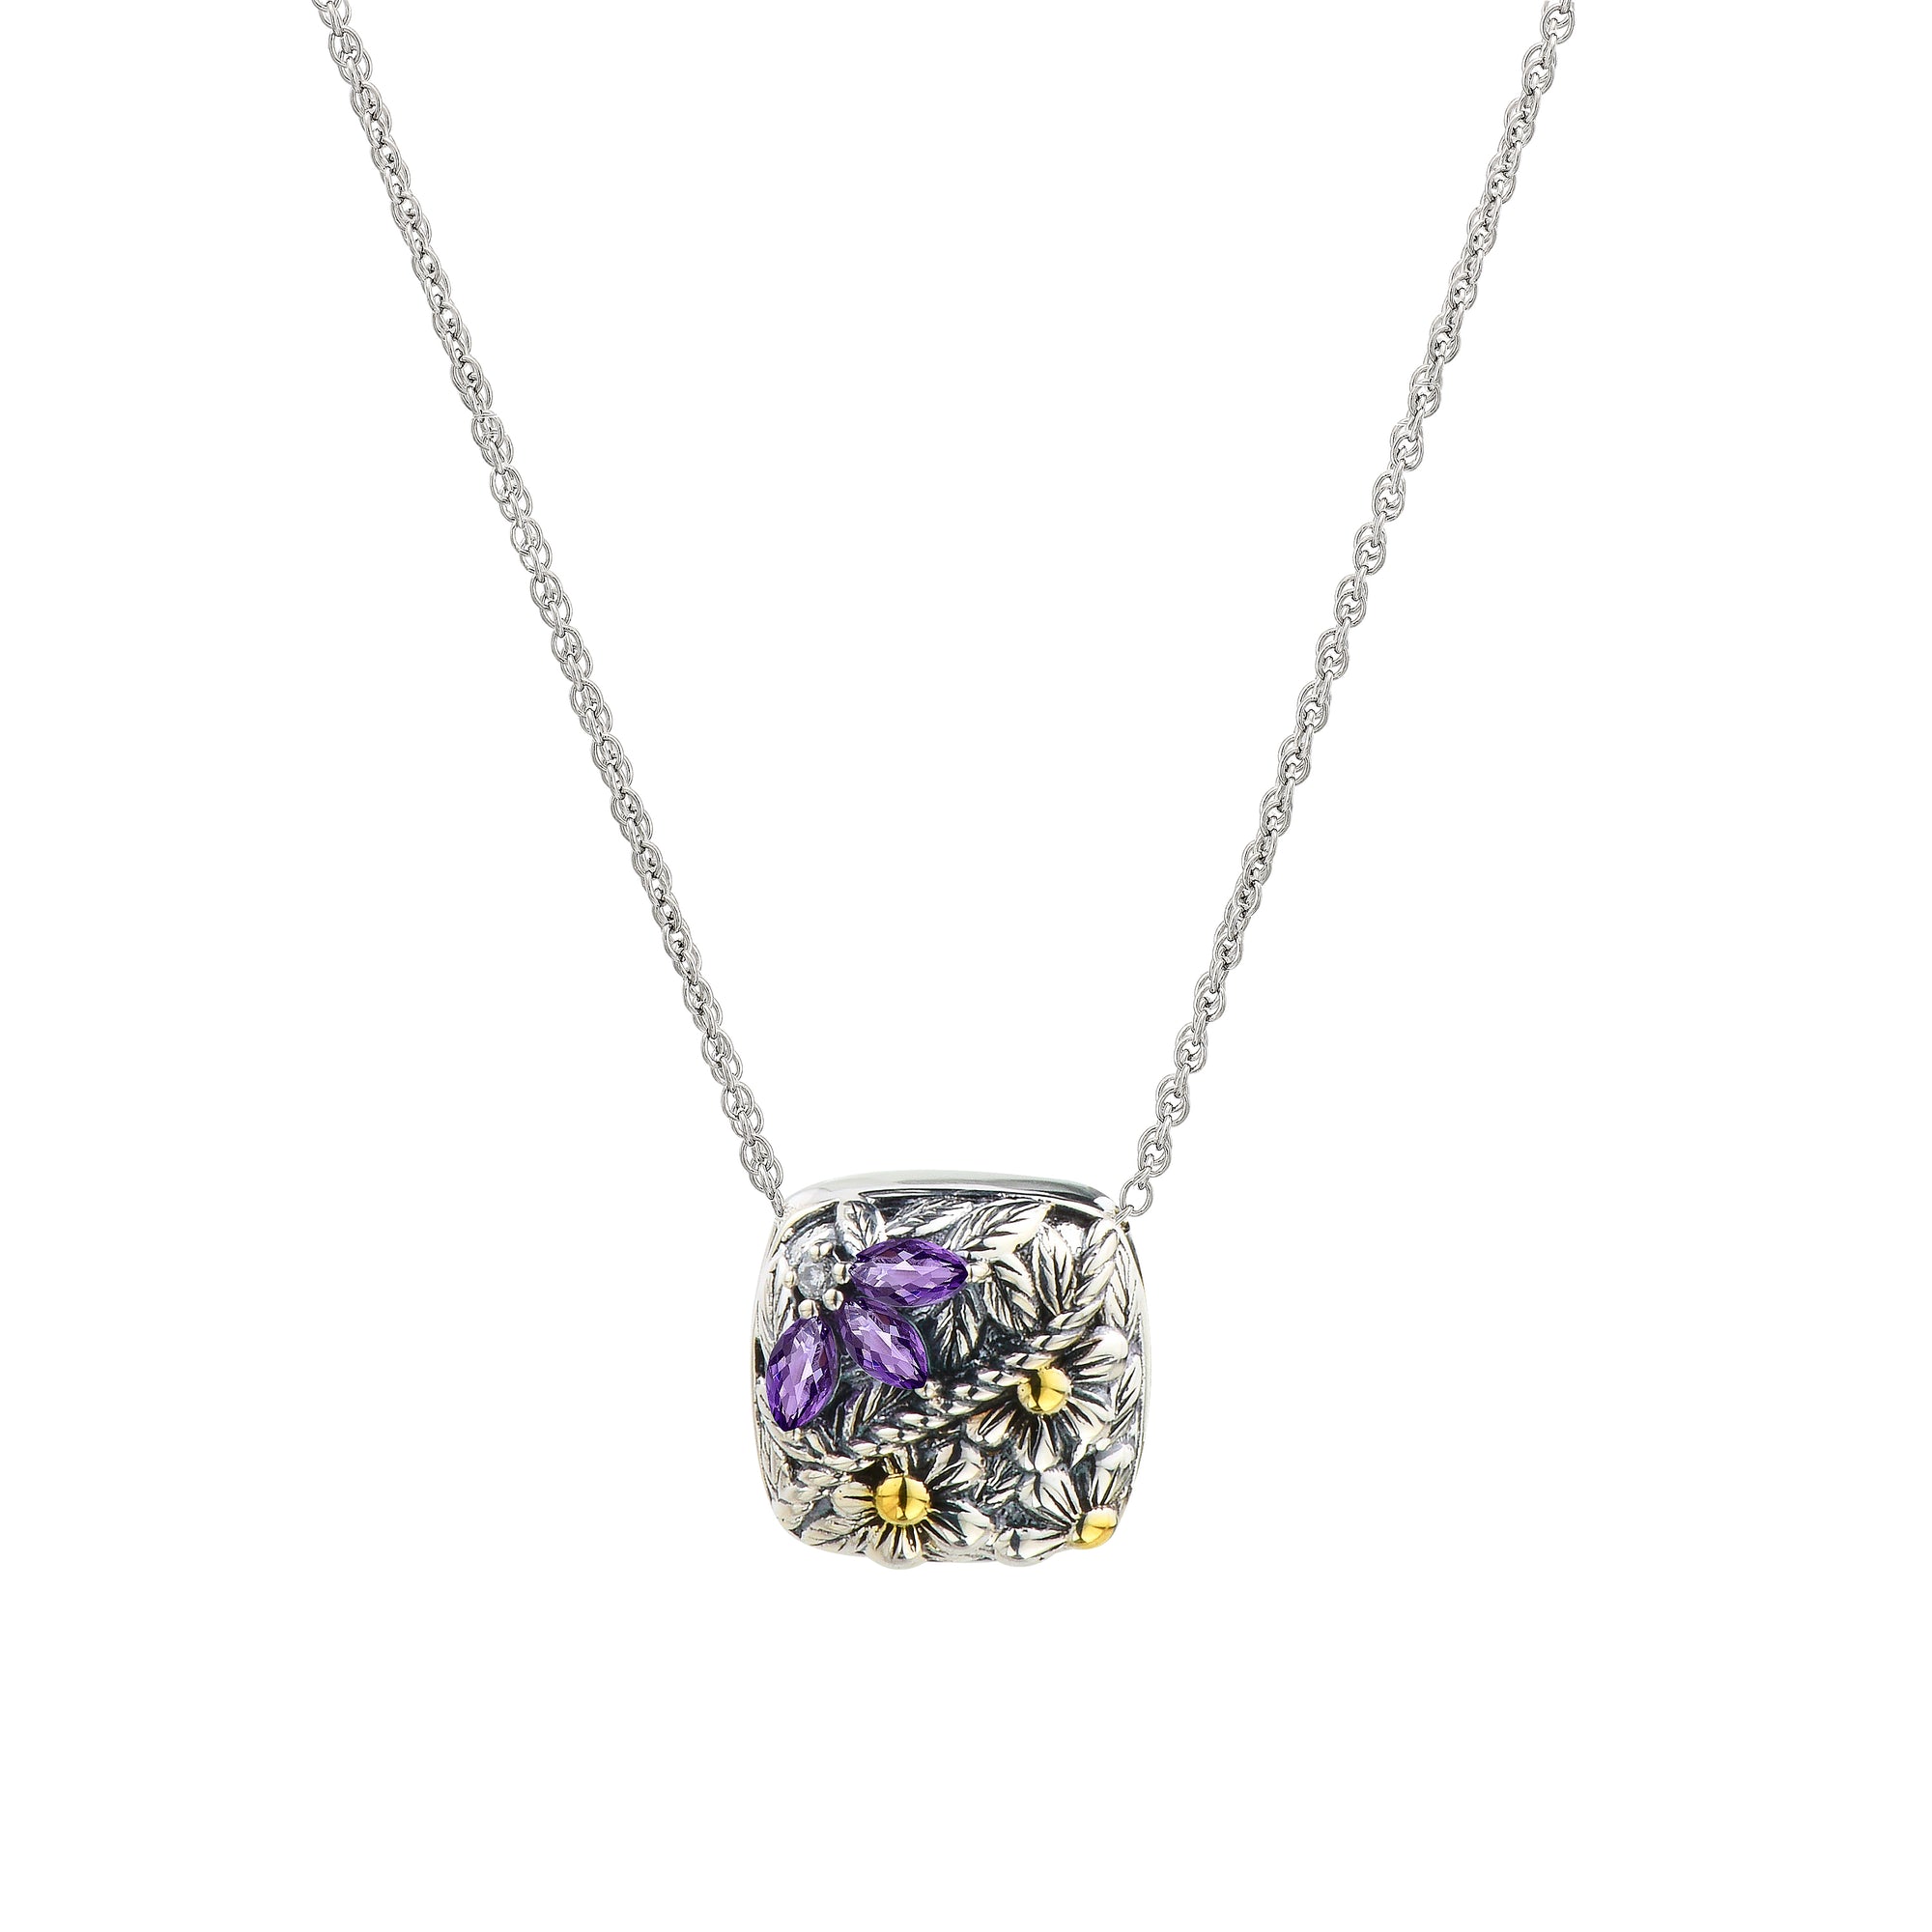 925 STERLING SILVER BLOSSOM CUSHION PENDANT NECKLACE